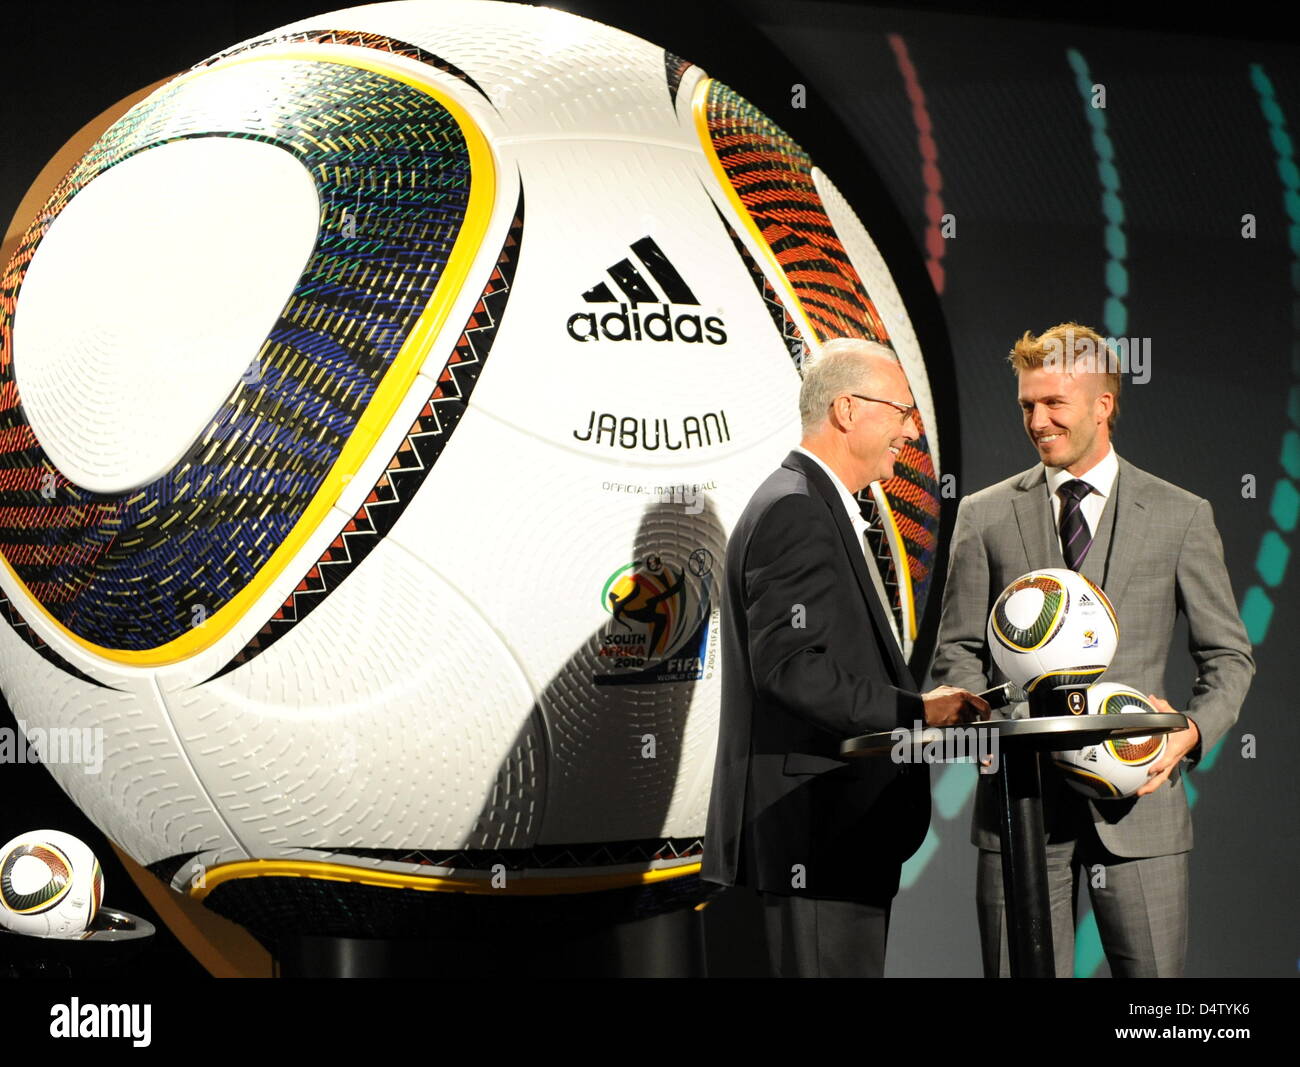 German soccer legend Franz Beckenbauer (L), president of the 2006 FIFA World Cup Germany, chats with England international David Beckham (R) as Jabulani, the official ball for the FIFA 2010 World Cup South Africa is handed over in Cape Town, South Africa, 04 December 2009. Jabulani is produced by German company adidas. Photo: BERND WEISSBROD Stock Photo